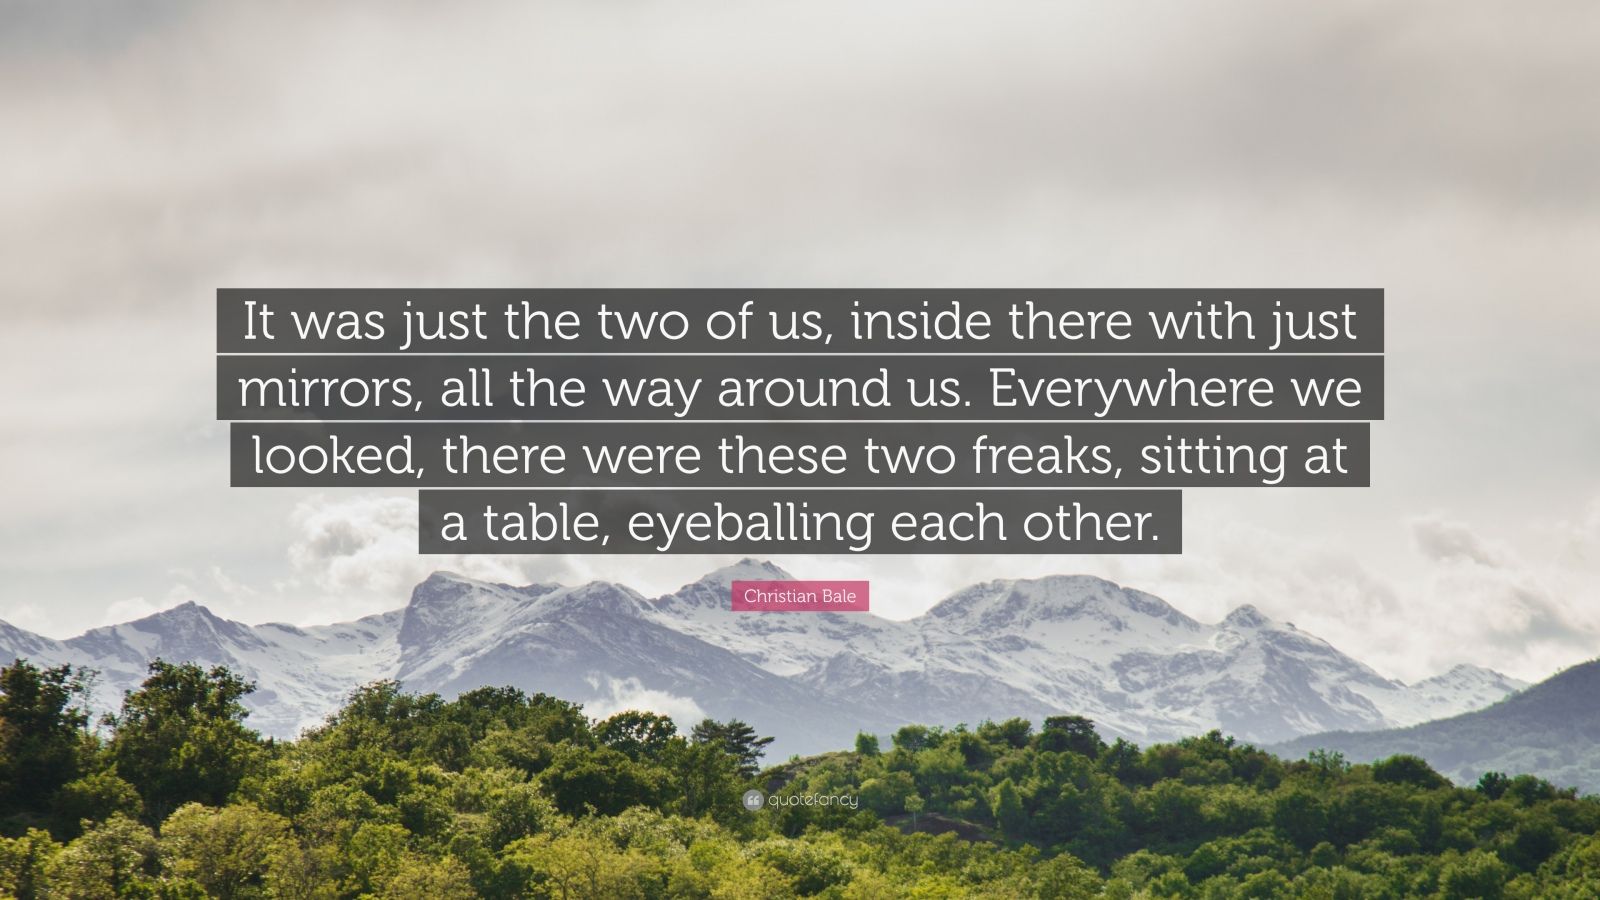 Just The Two Of Us Quotes. QuotesGram